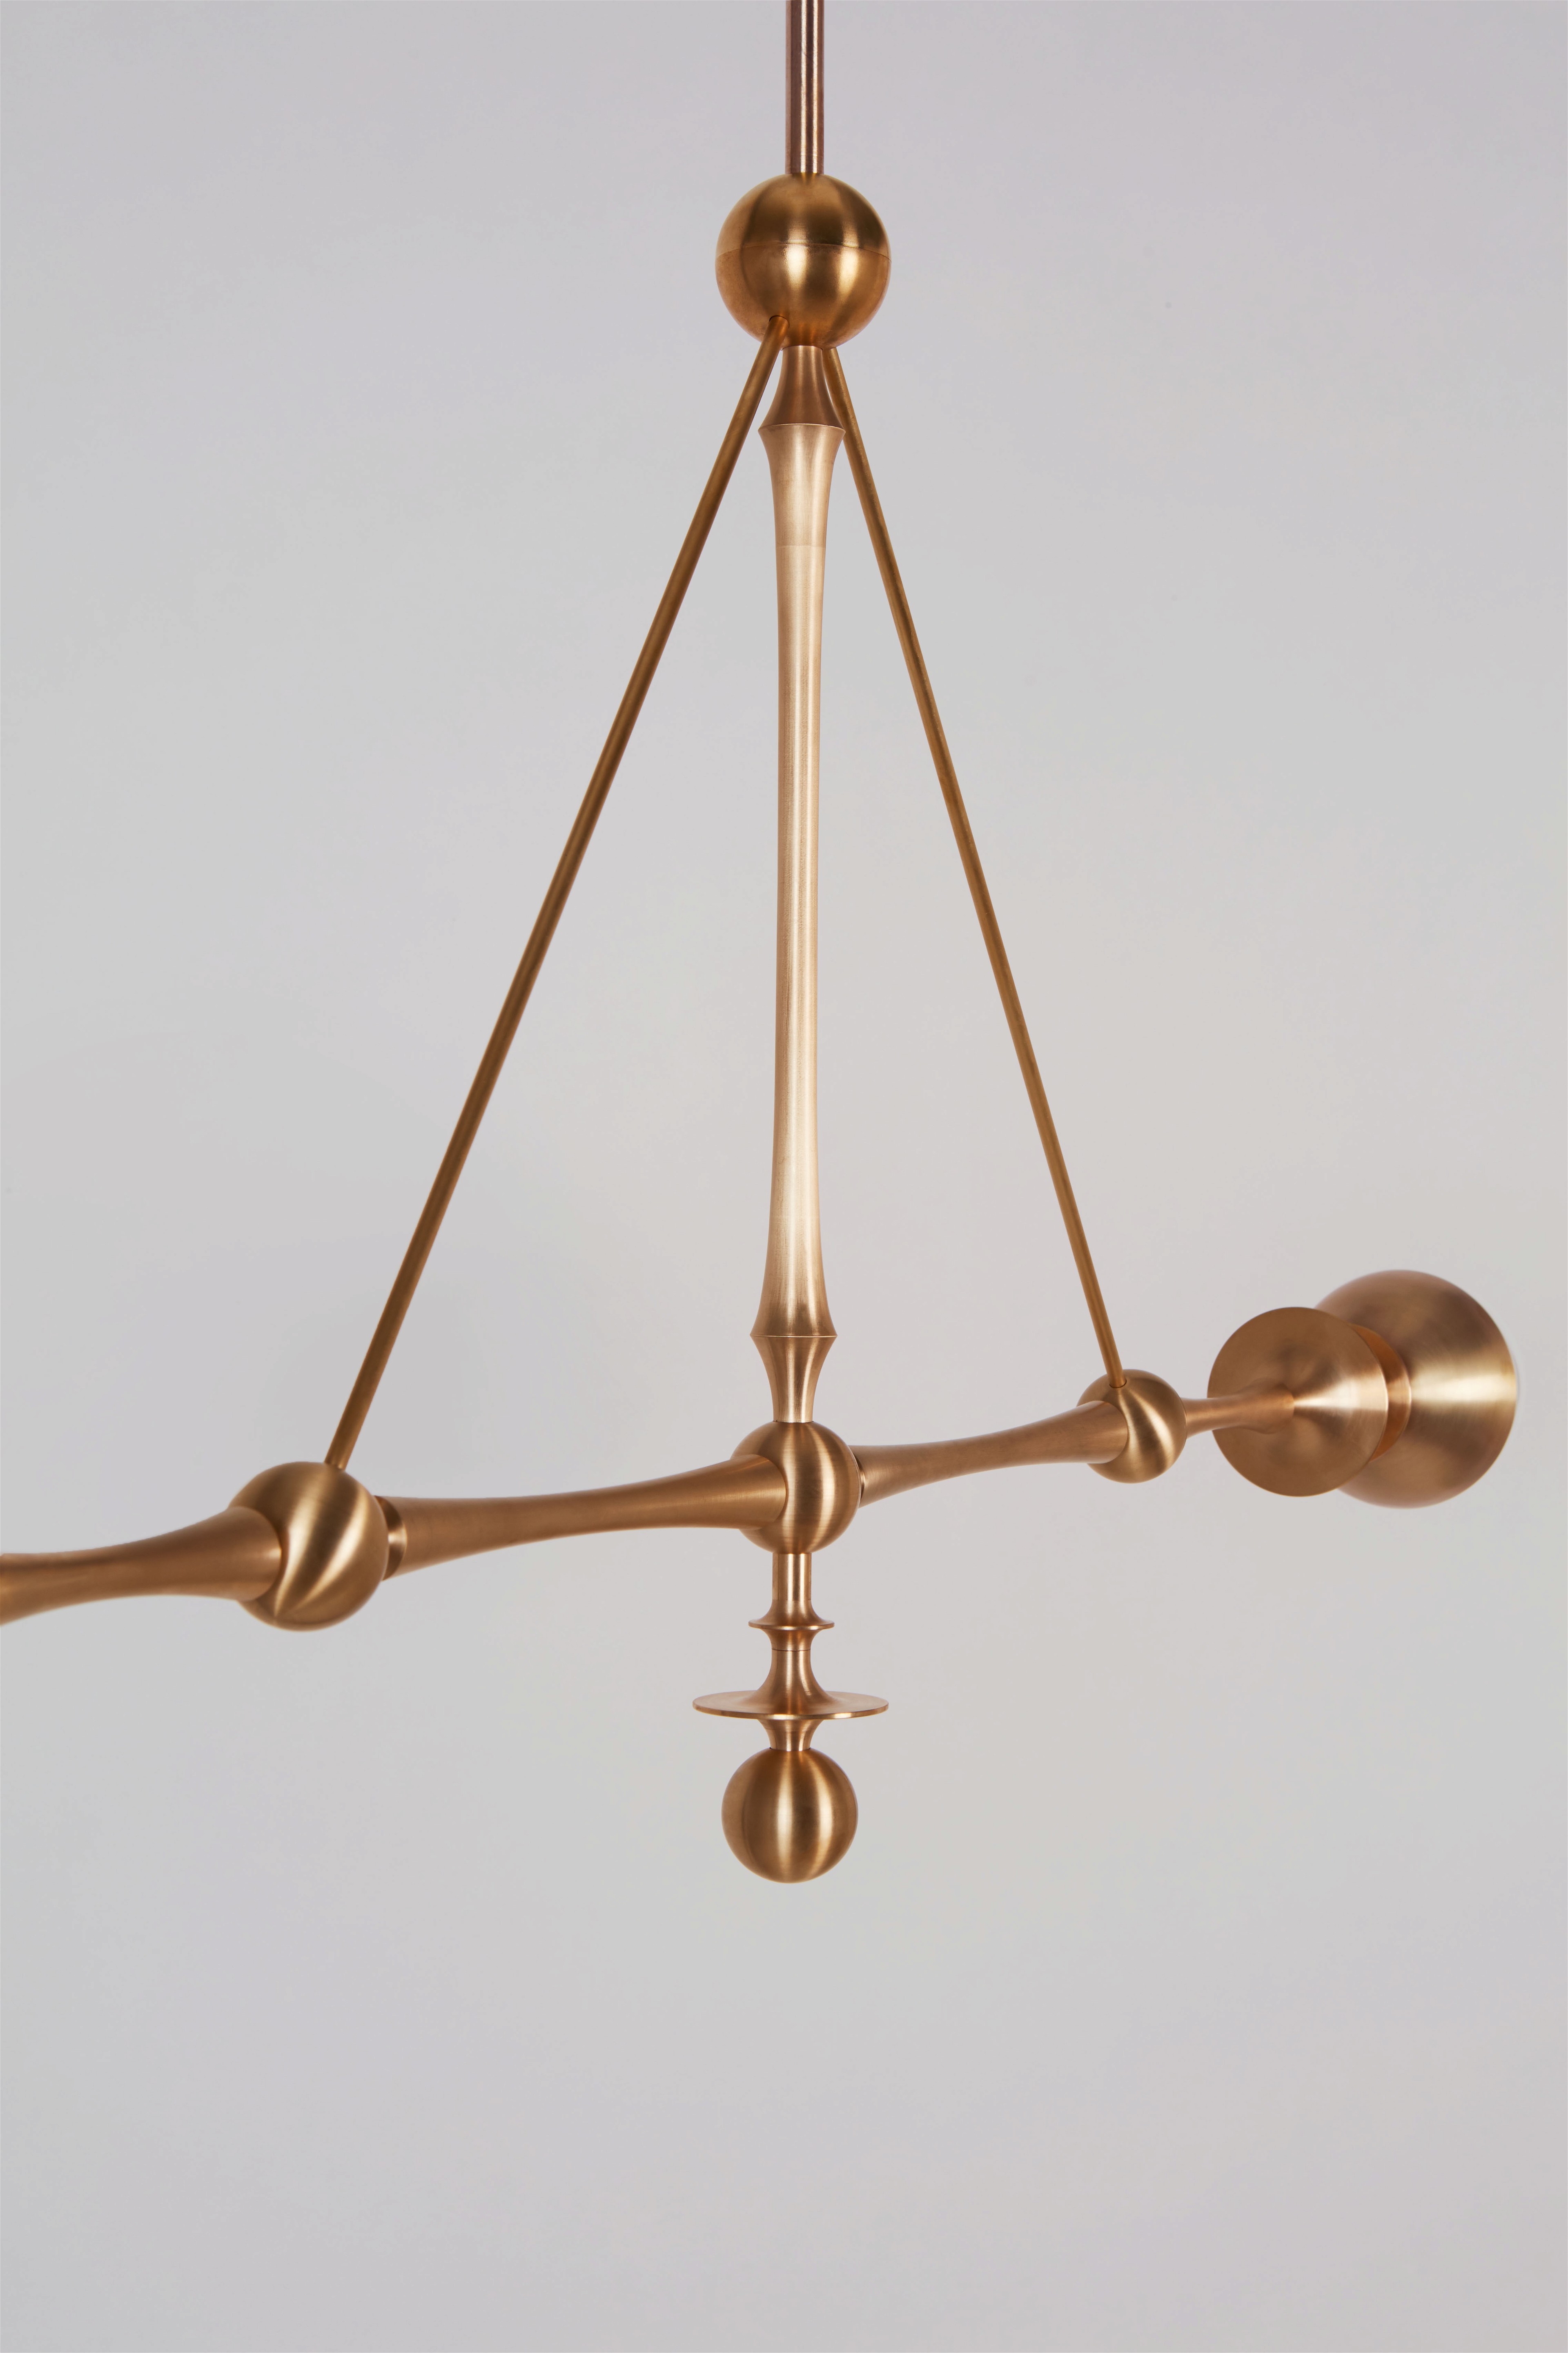 a brass chandelier hanging from a ceiling